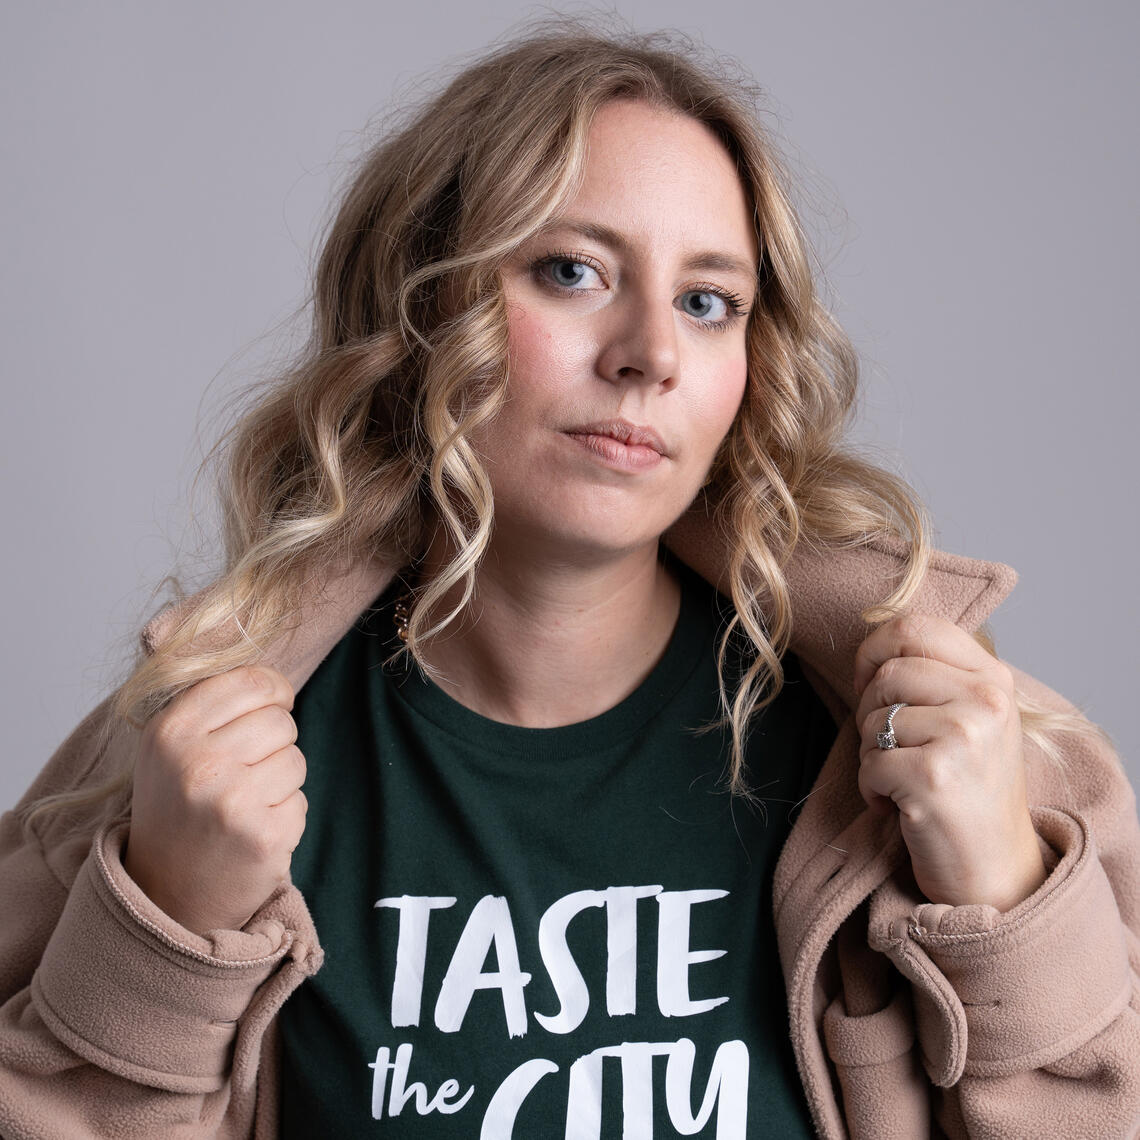 A woman wearing a shirt that says Taste the City